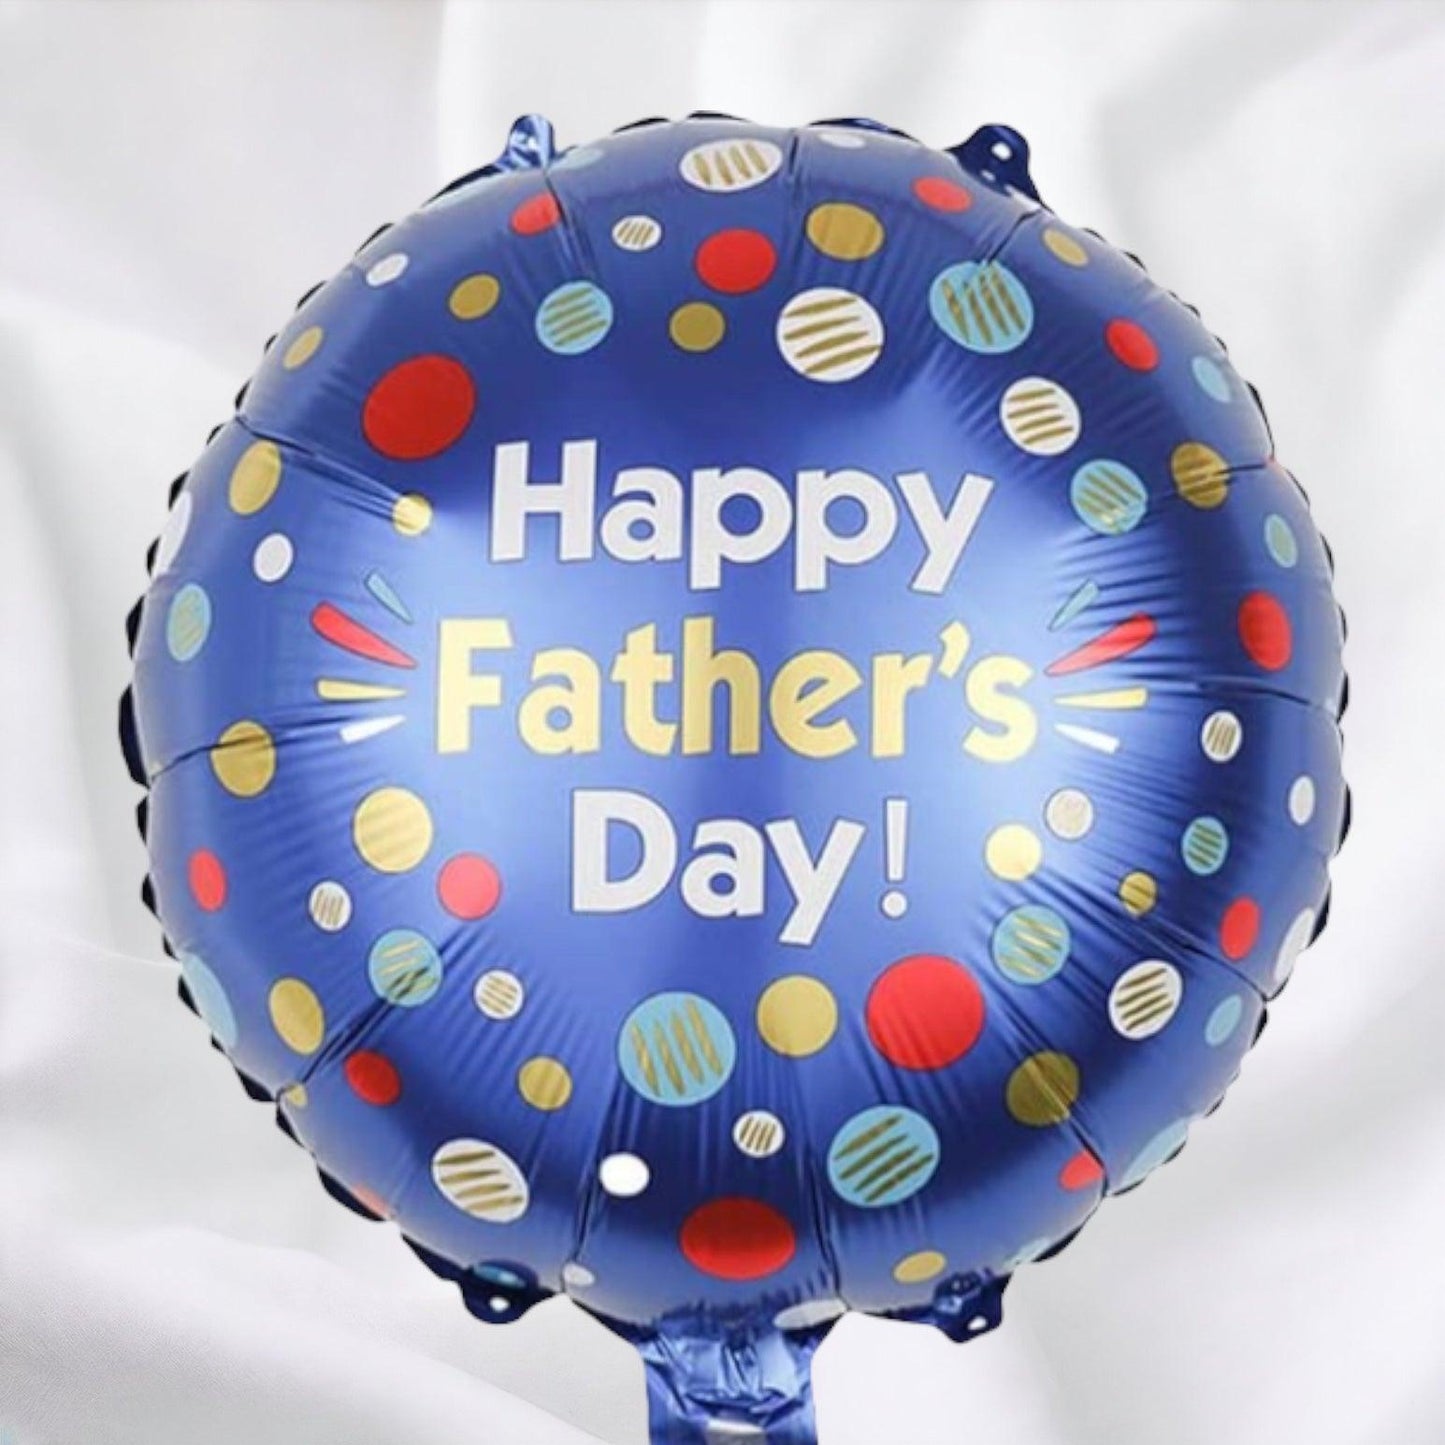 Happy Fathers Day Standard Balloon - Treats & Sweets